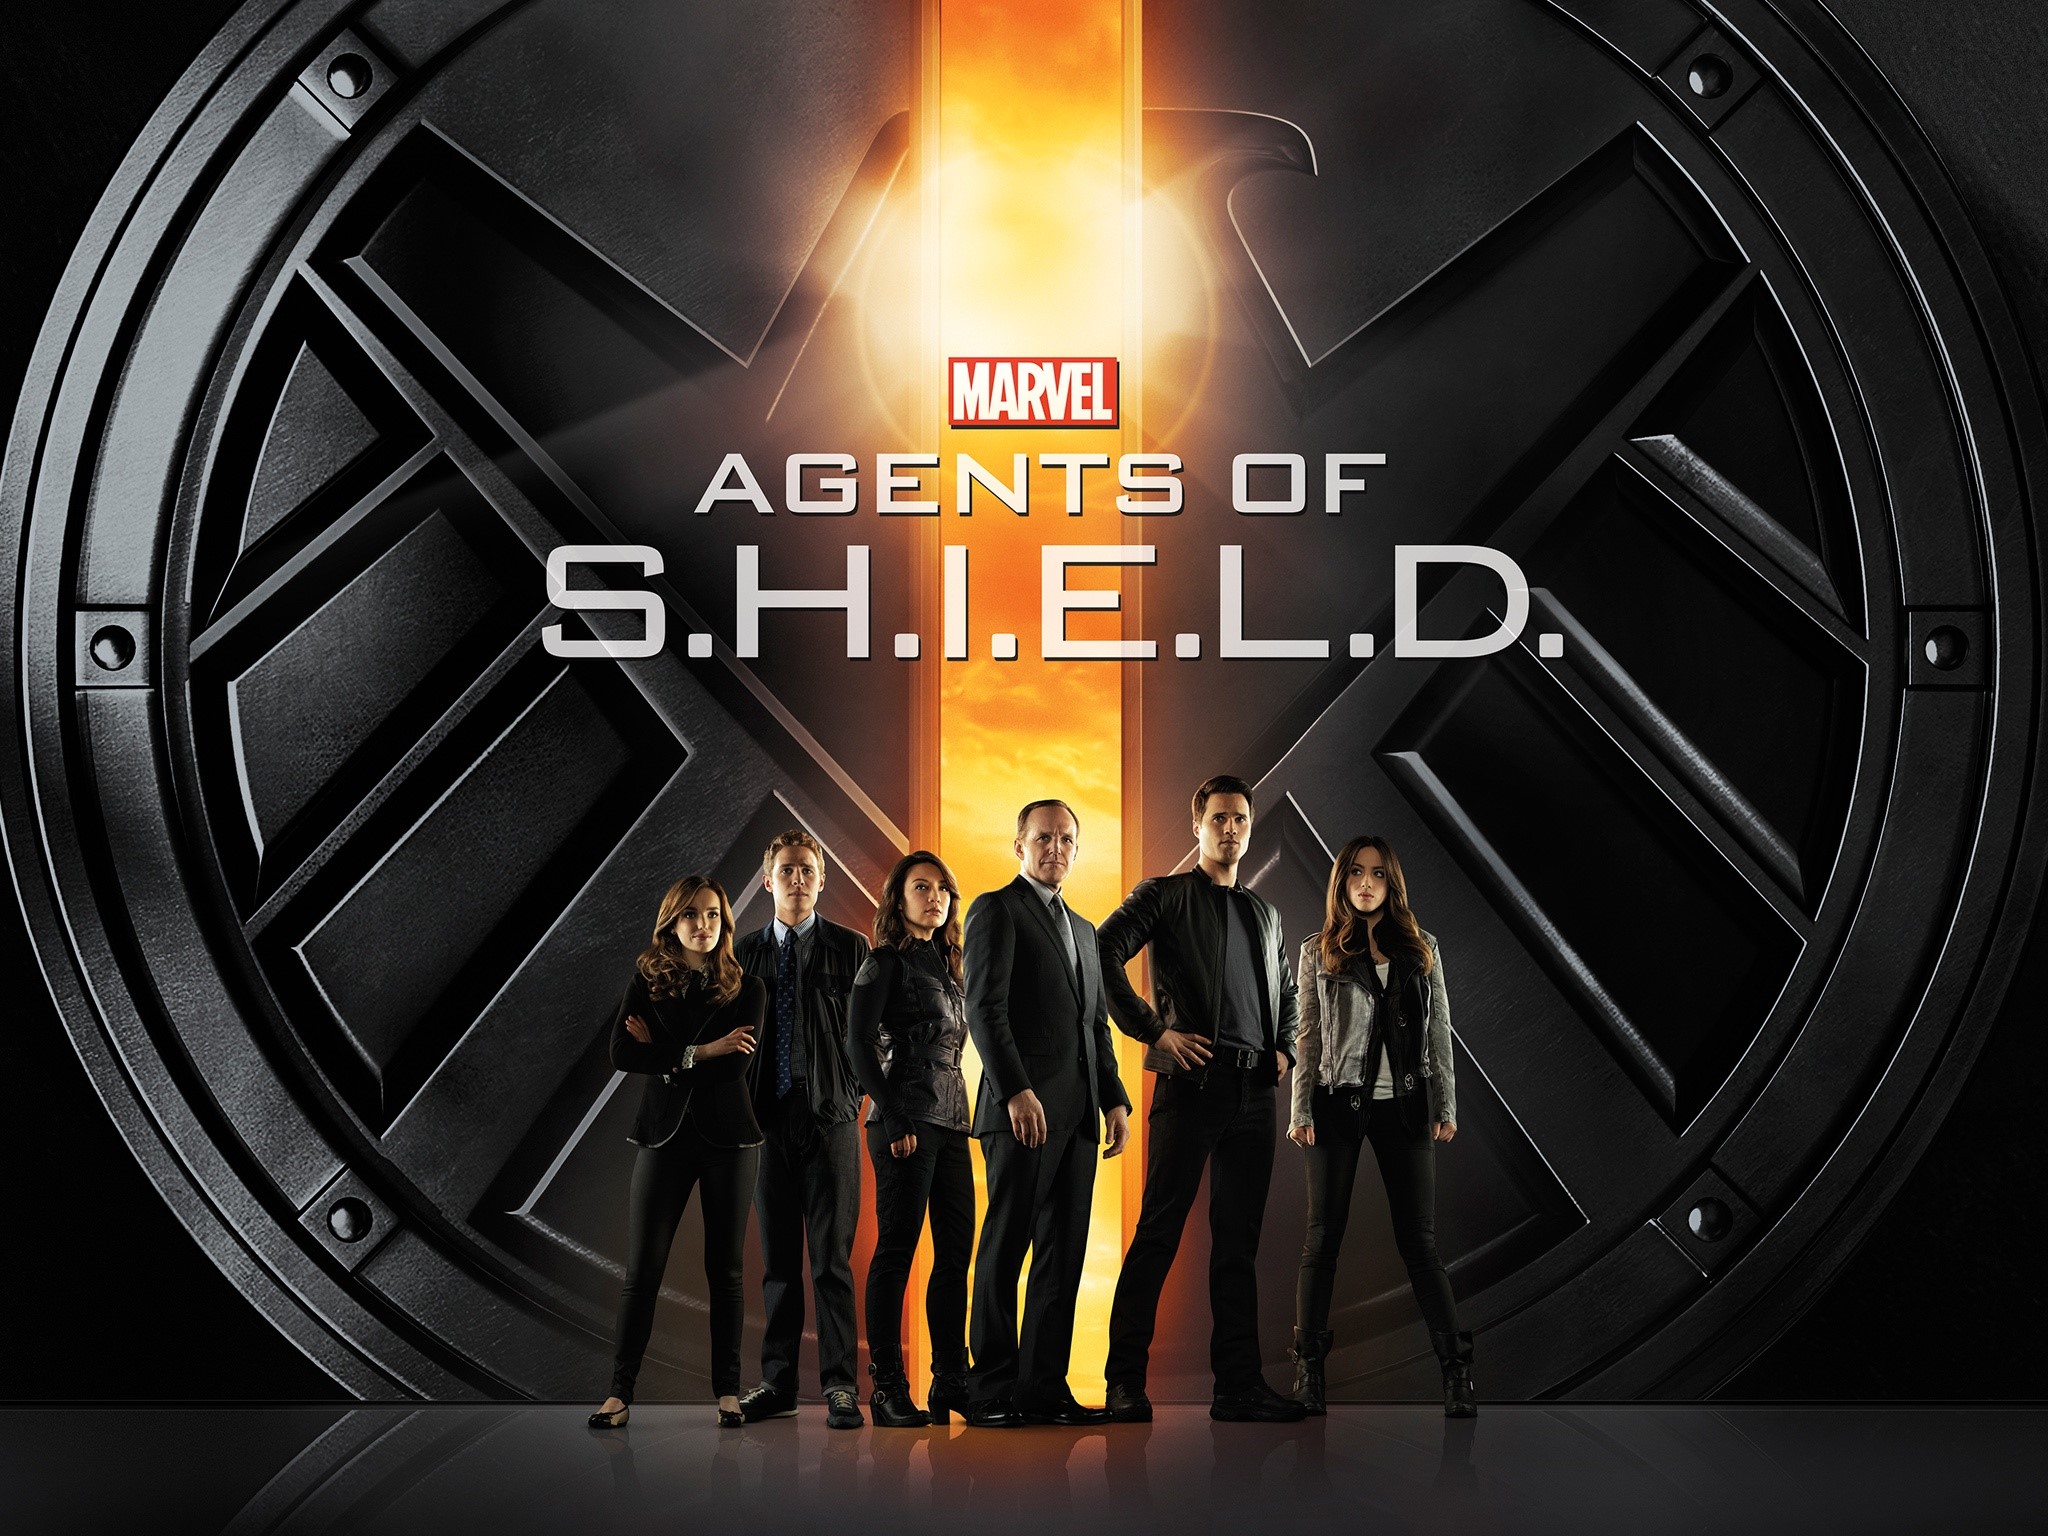 Agents of shield itunes